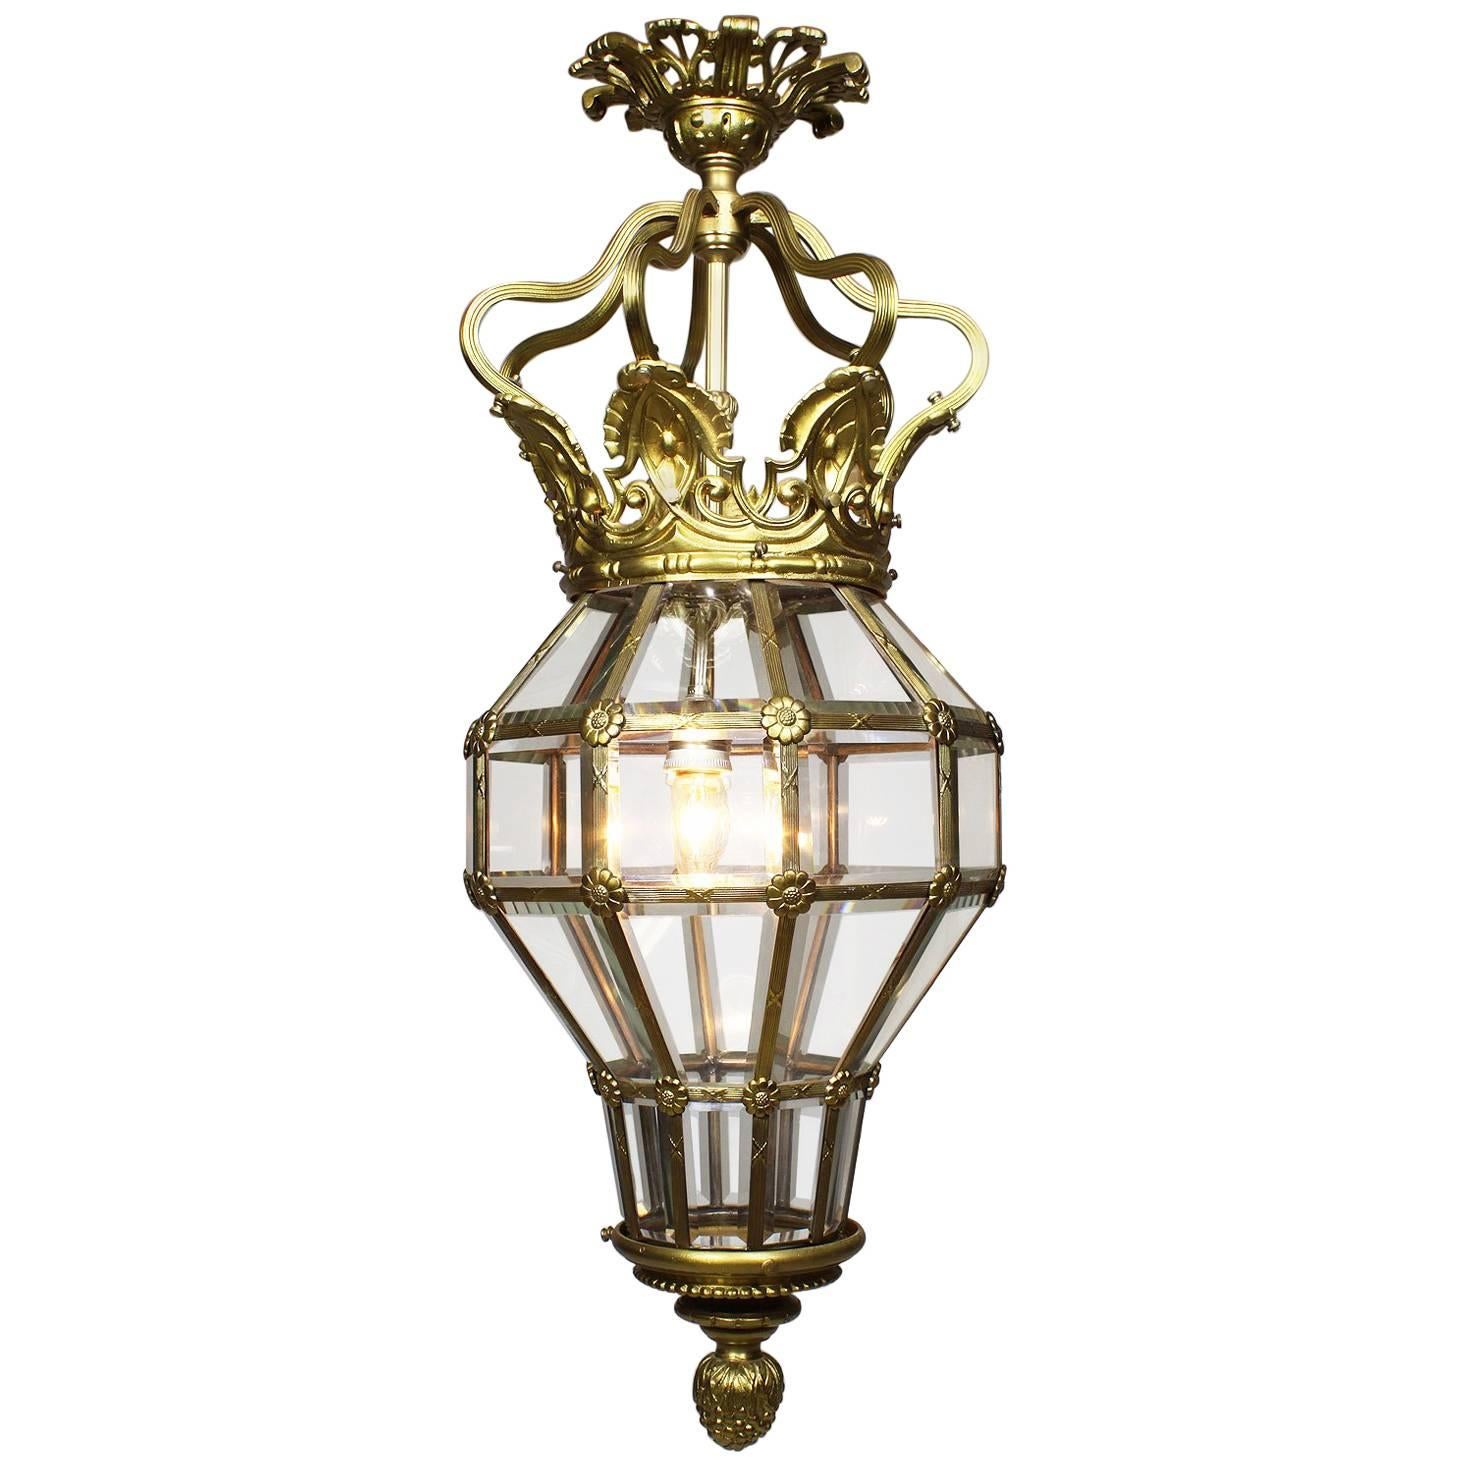 Early 20th Century Gilt-Metal and Glass "Versailles" Style Hanging Lantern For Sale